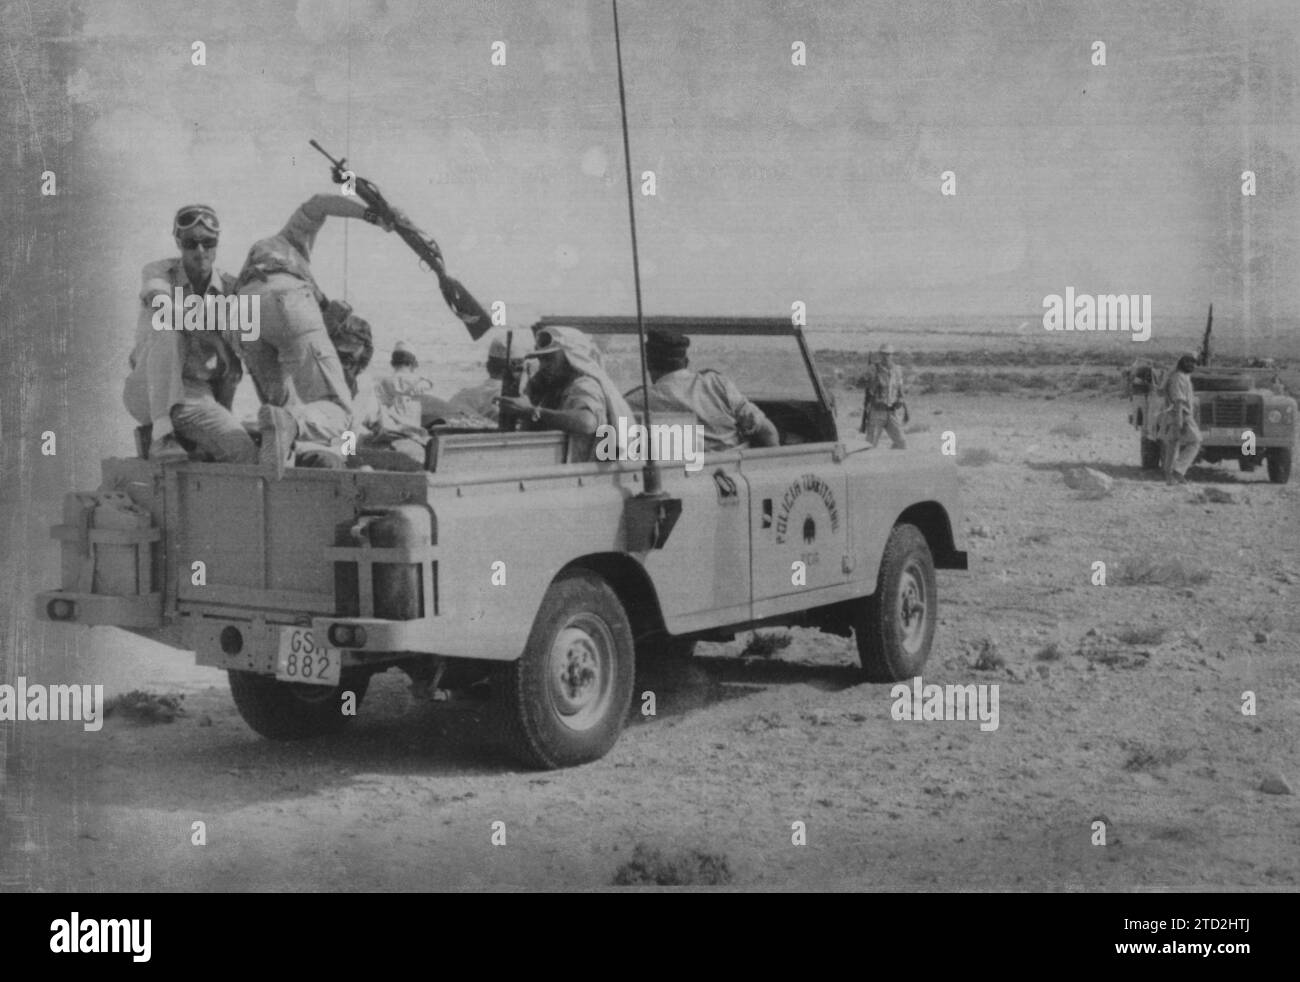 Tarfaya (El Aaiún), 11/05/1975. Members of the Territorial Police of the Spanish Army tour the border defensive zone in a Land Rover Defender. Credit: Album / Archivo ABC Stock Photo